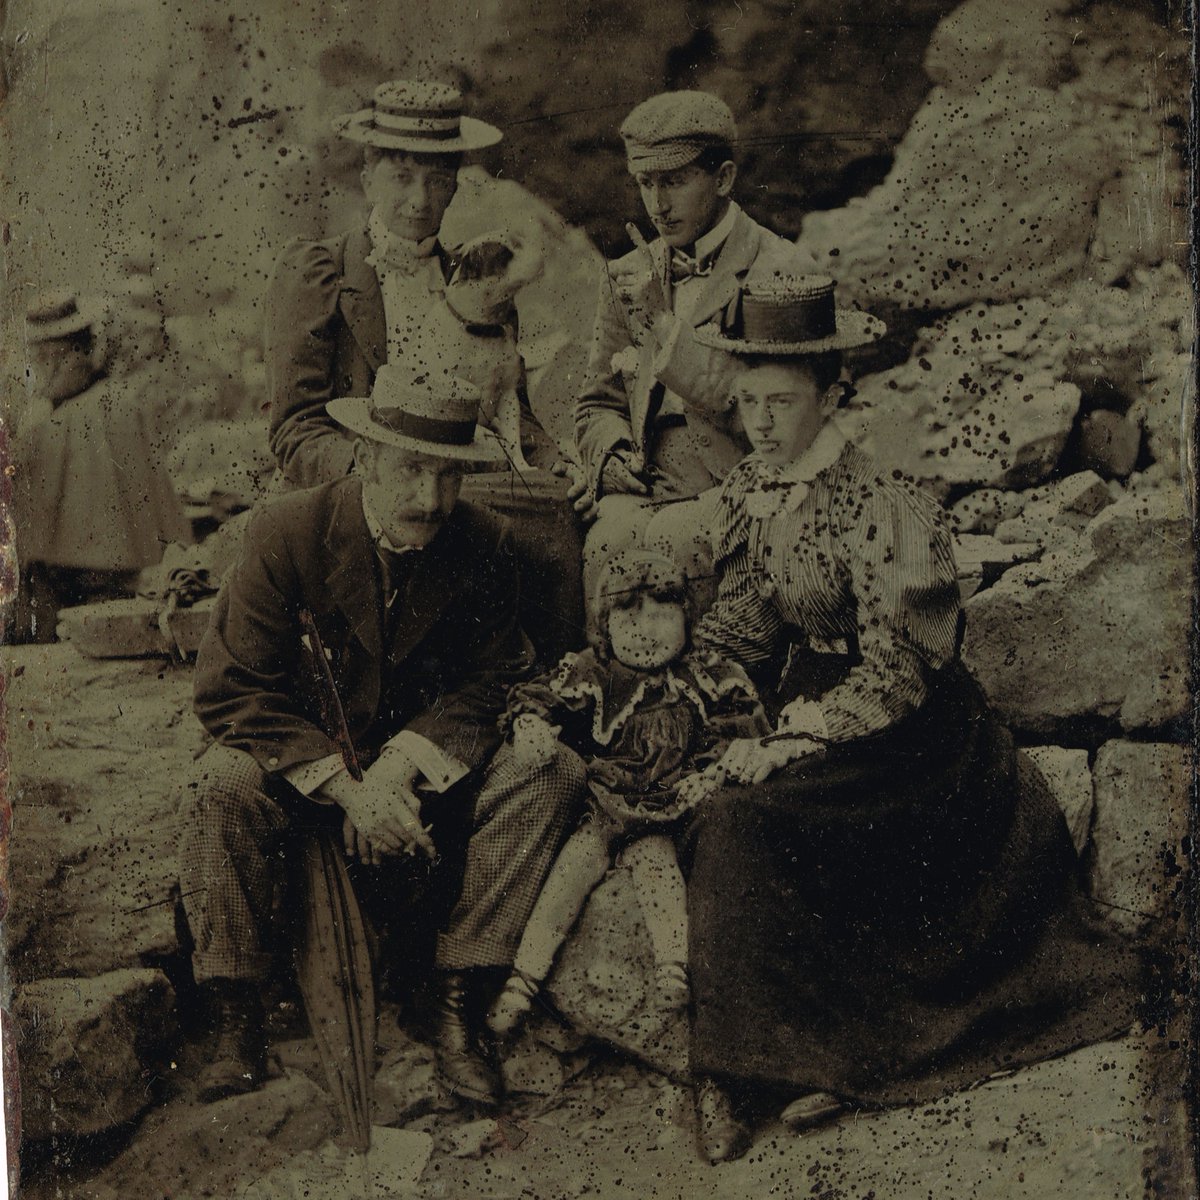 A recent donation of some rare tintype images taken on Perranporth Beach. People posed for their pictures against the back drop of the cliffs and the photographer developed their images in a nearby cave.